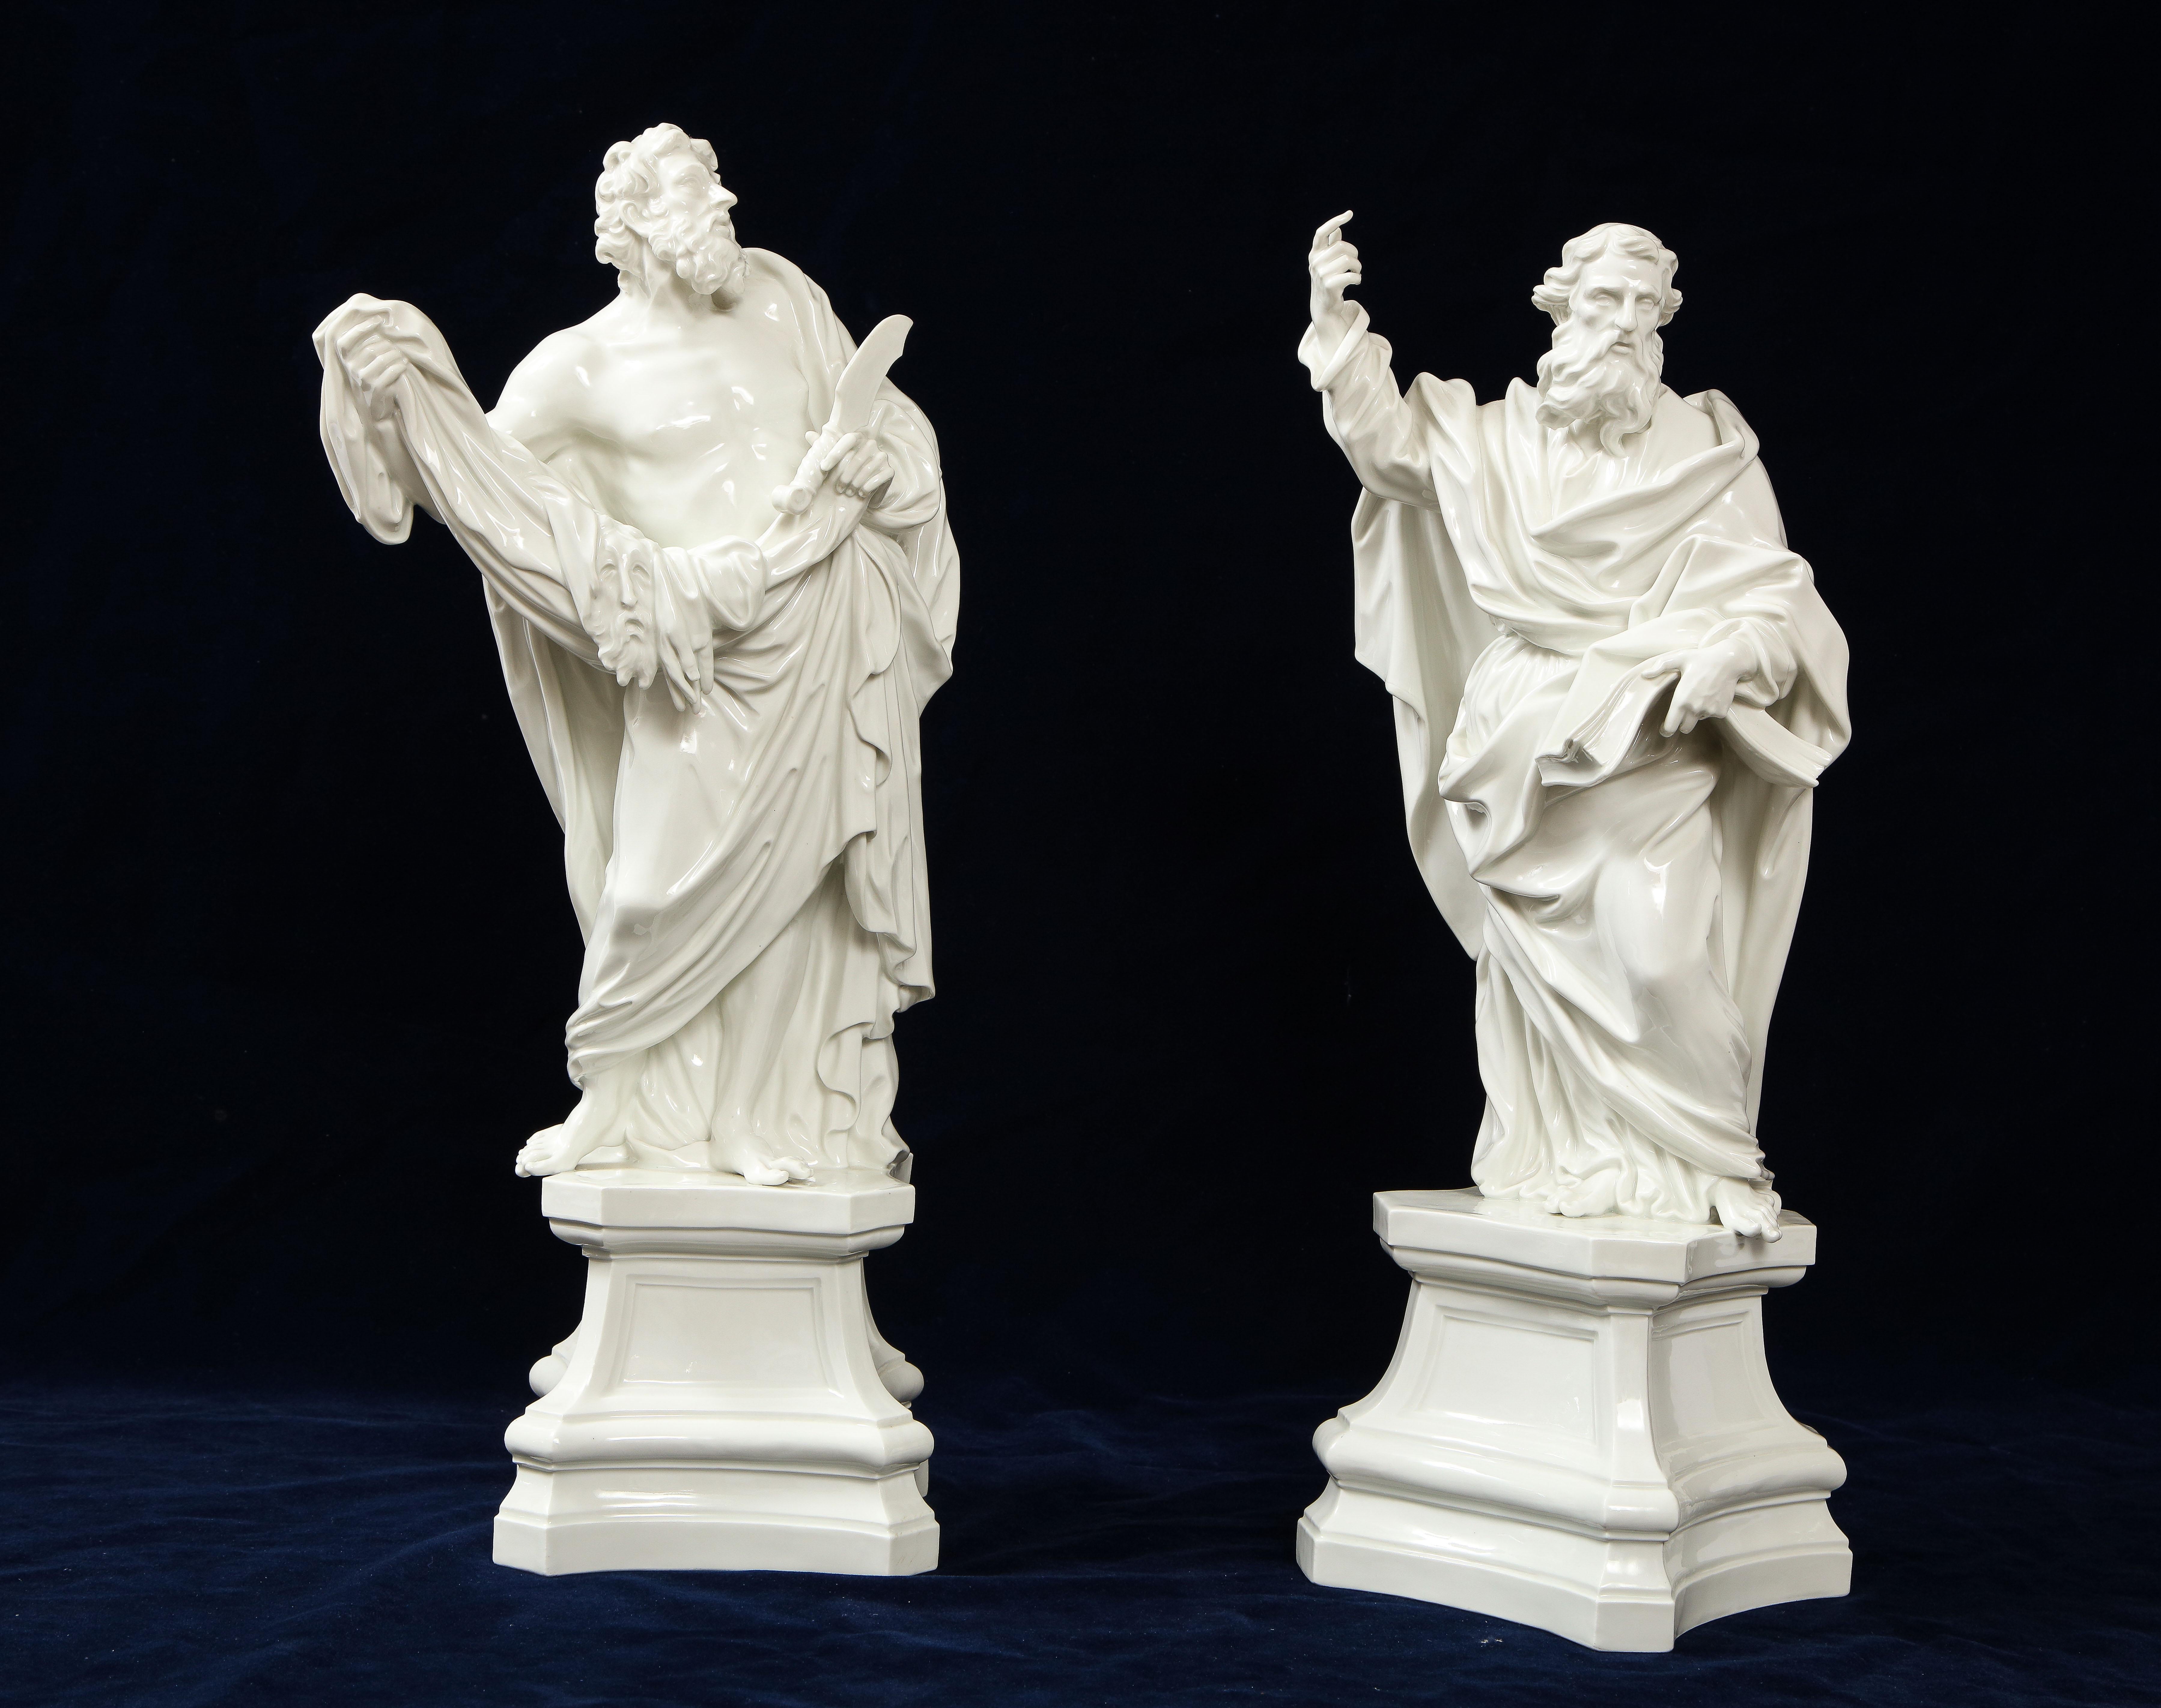 An Incredible and Quite Rare Pair of 19th Century Meissen Porcelain White Figures of St. James, Brother of St. John The Evangelist, and St. Paul, respectively. Each is beautifully hand-carved with very realistic detail. Both figures are perched a